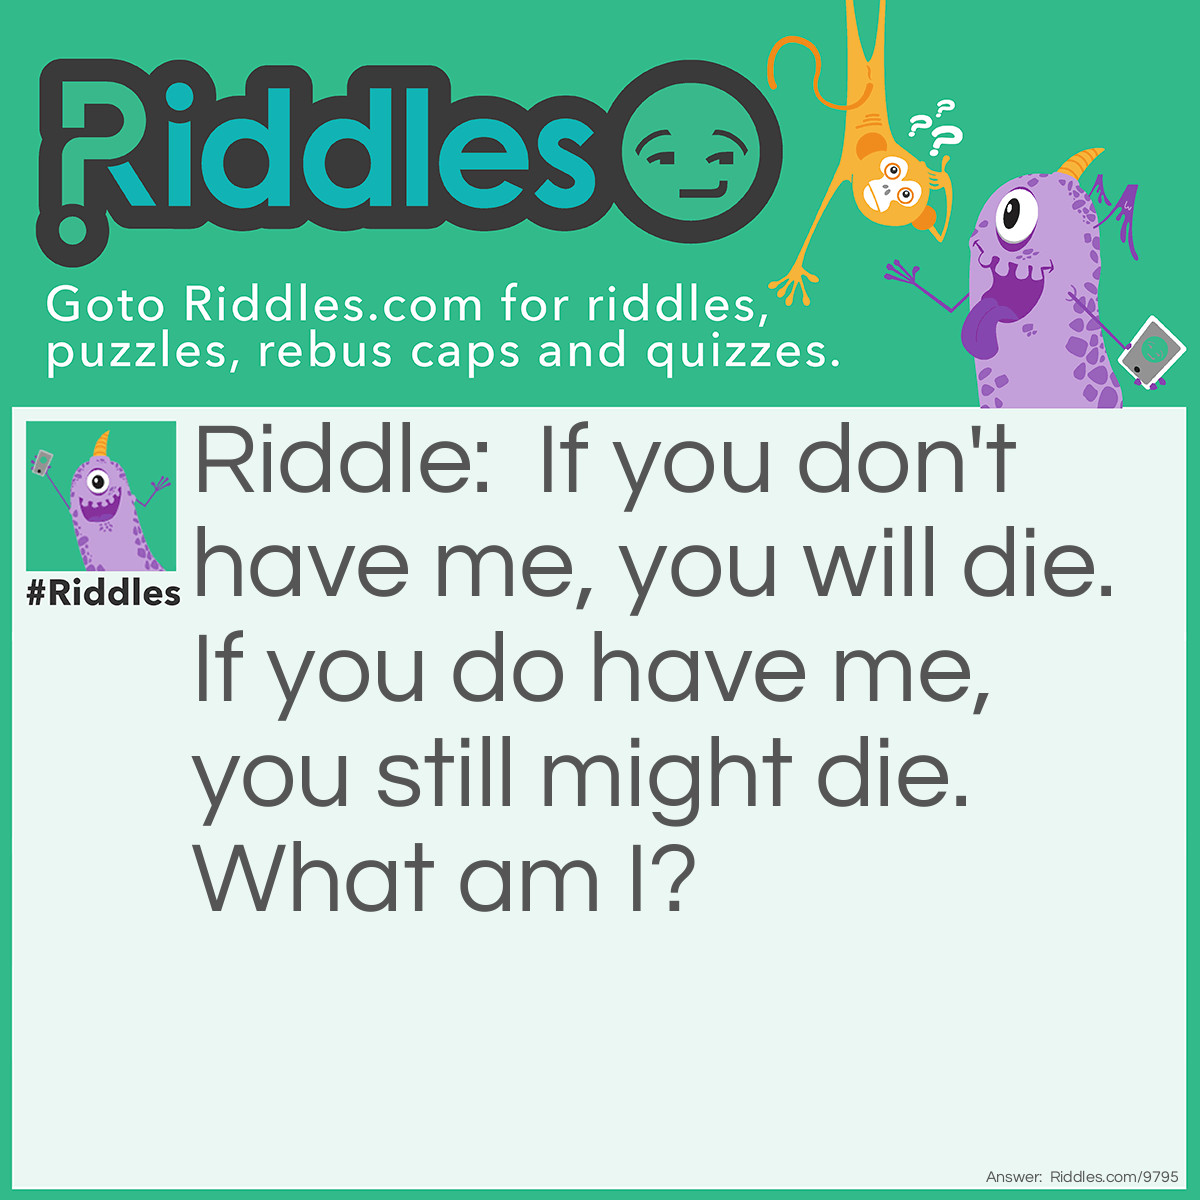 Riddle: If you don't have me, you will die. If you do have me, you still might die. What am I? Answer: Blood.